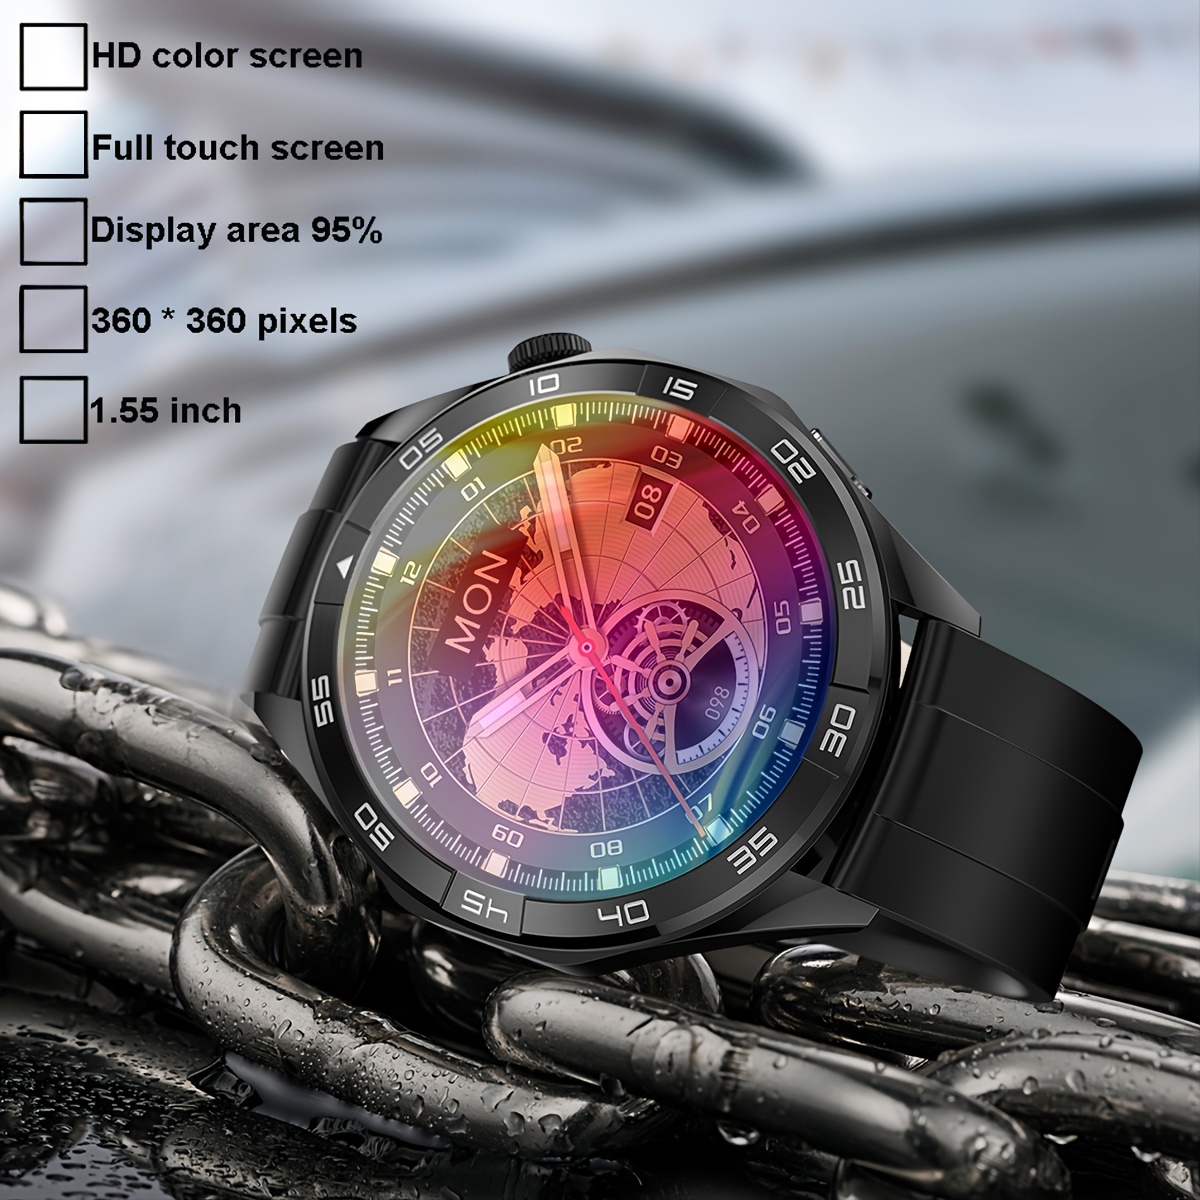 men smartwatch wireless call make answer reject calls wireless dialing digital dialing high definition full touch screen steel watch strap faux leather watch strap sports smartwatch mens gift